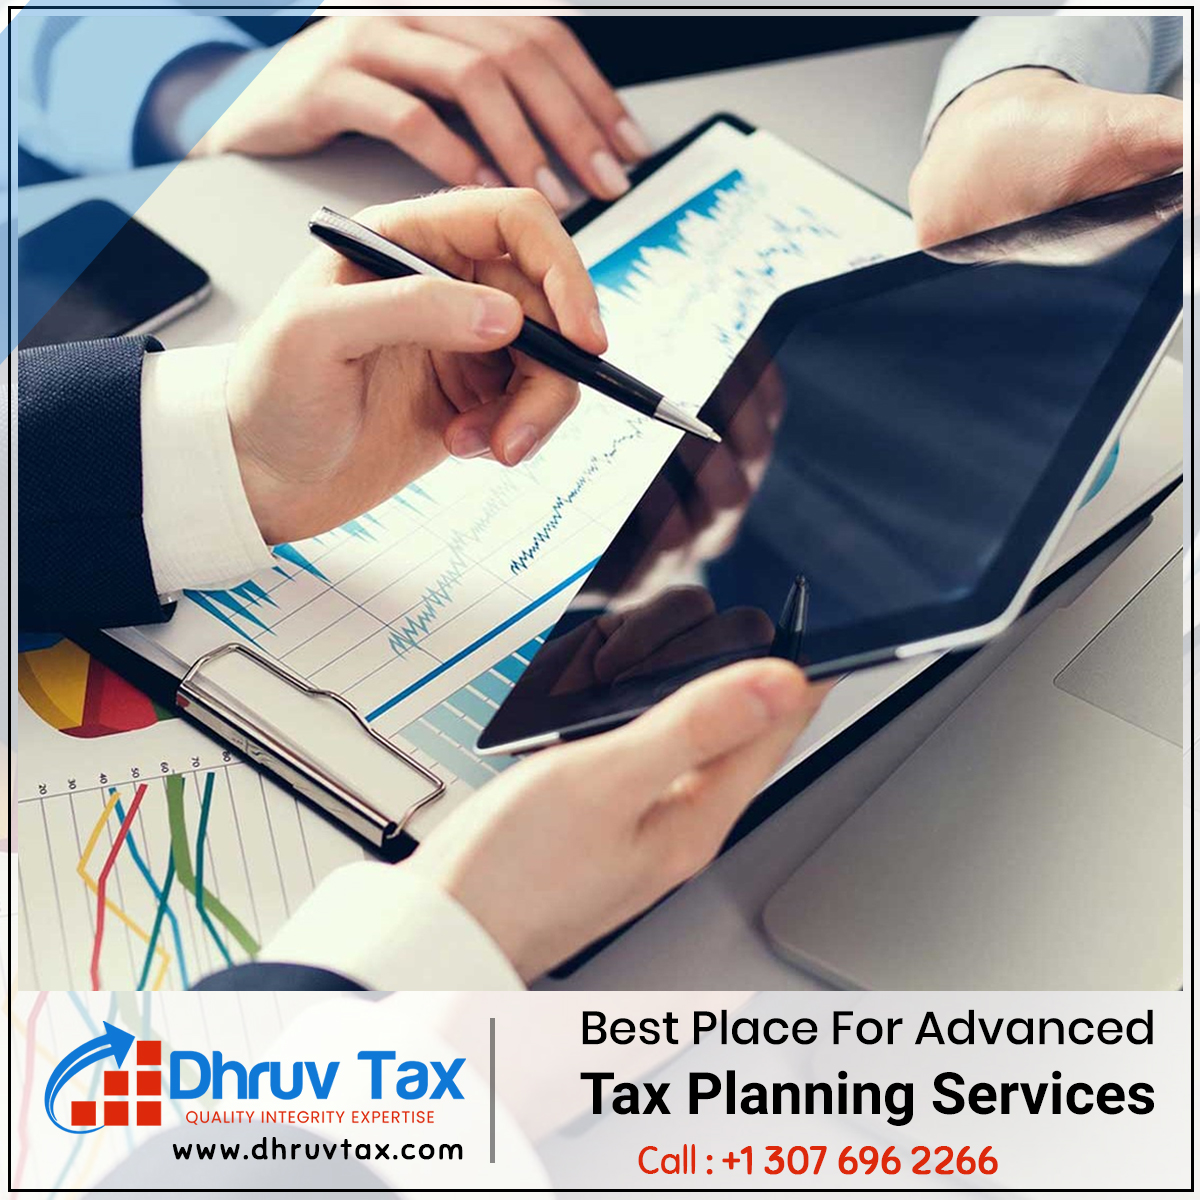 best-place-for-advanced-tax-planning-services-dhruv-tax